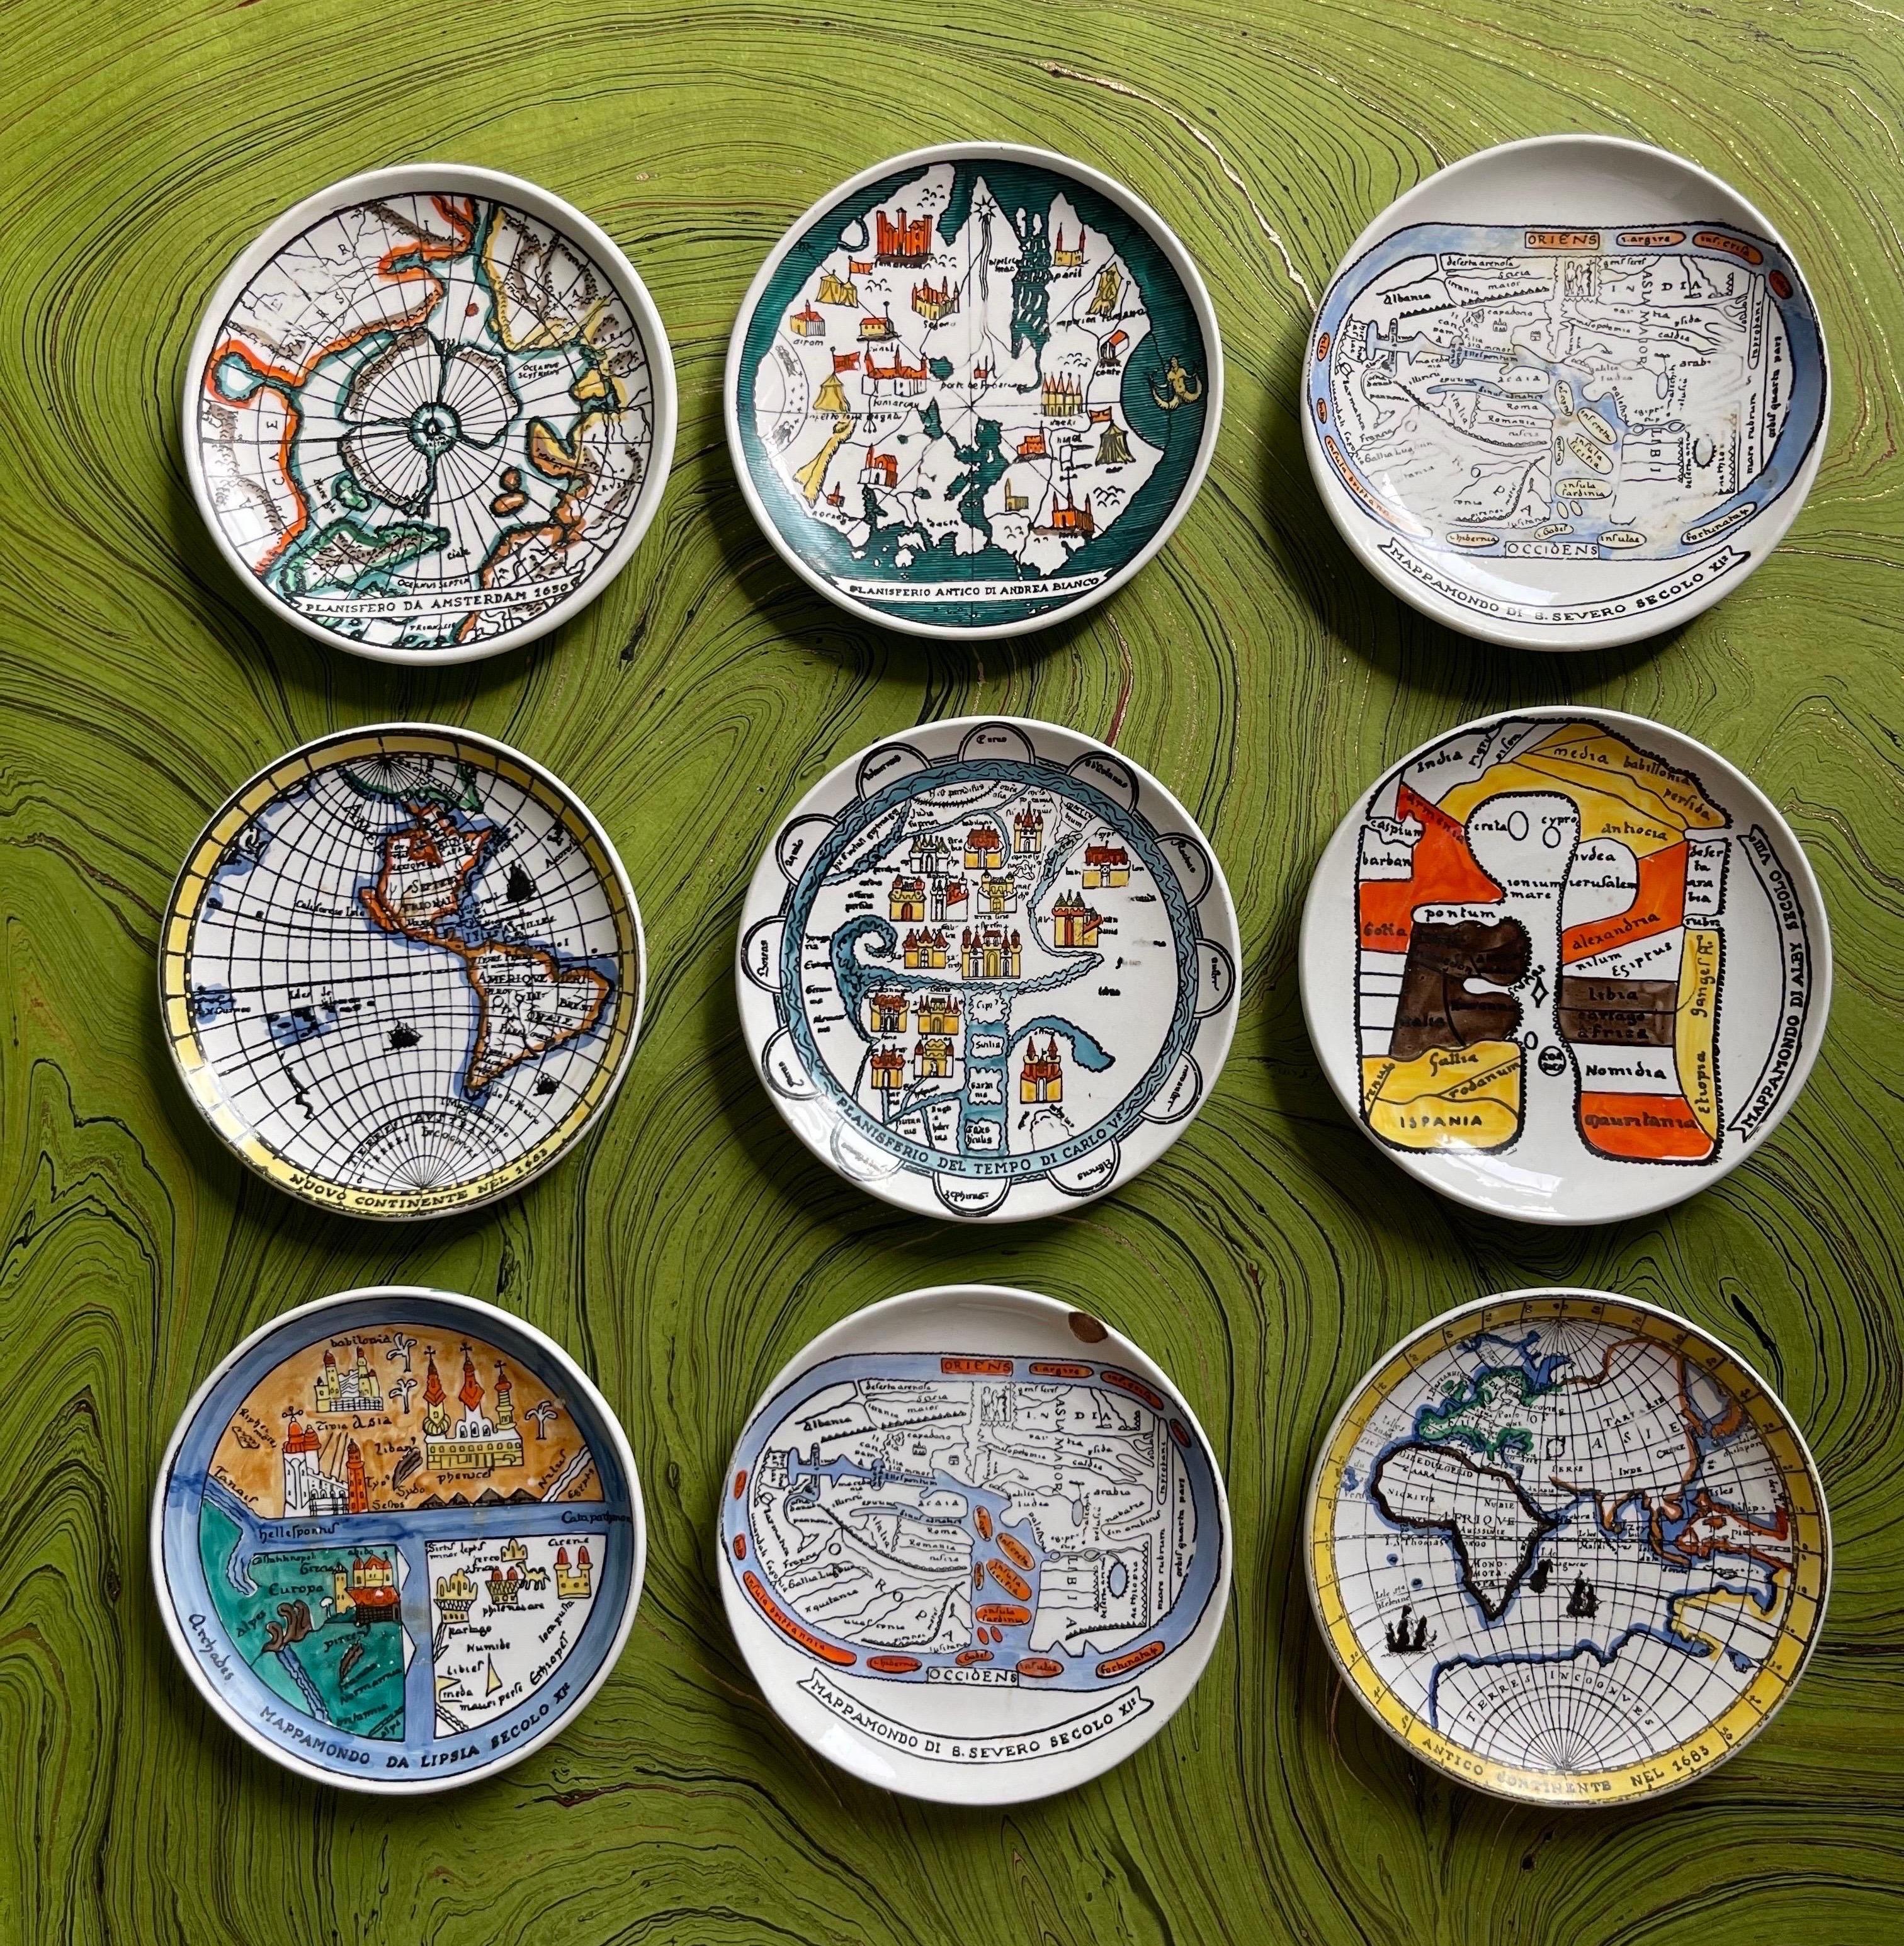 Piero Fornasetti’s “Antichi Planisferi” or antique maps series may be the most detailed and articulated of his coaster designs. Intricately hand-painted onto lithographic transfers, these plates have a lot of small condition issues, but as any